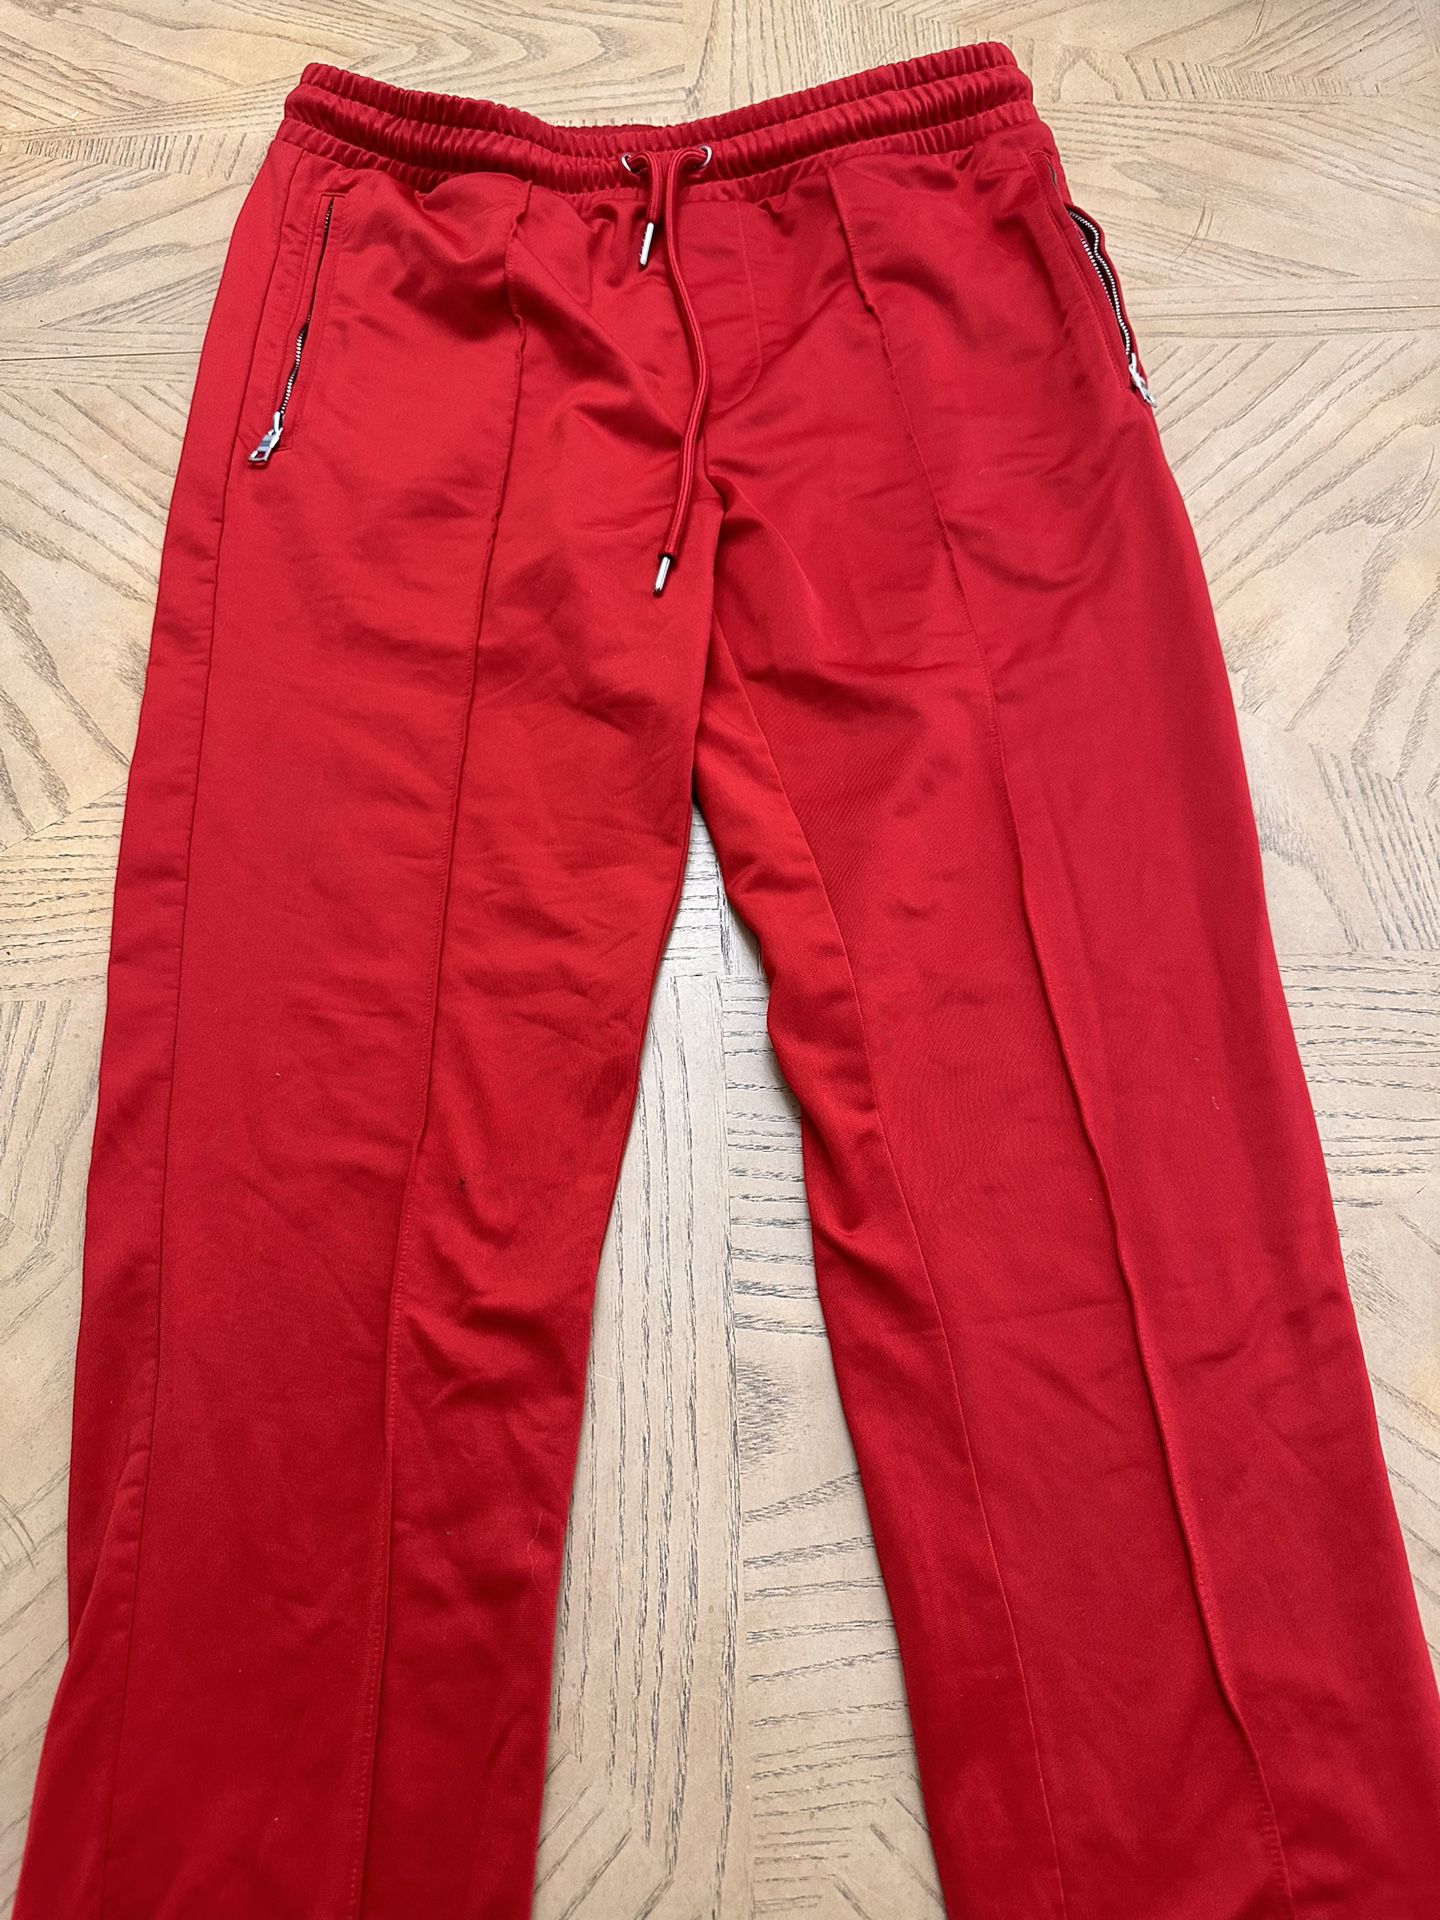 Men’s sweatpants/joggers red with silver zippers Size XL